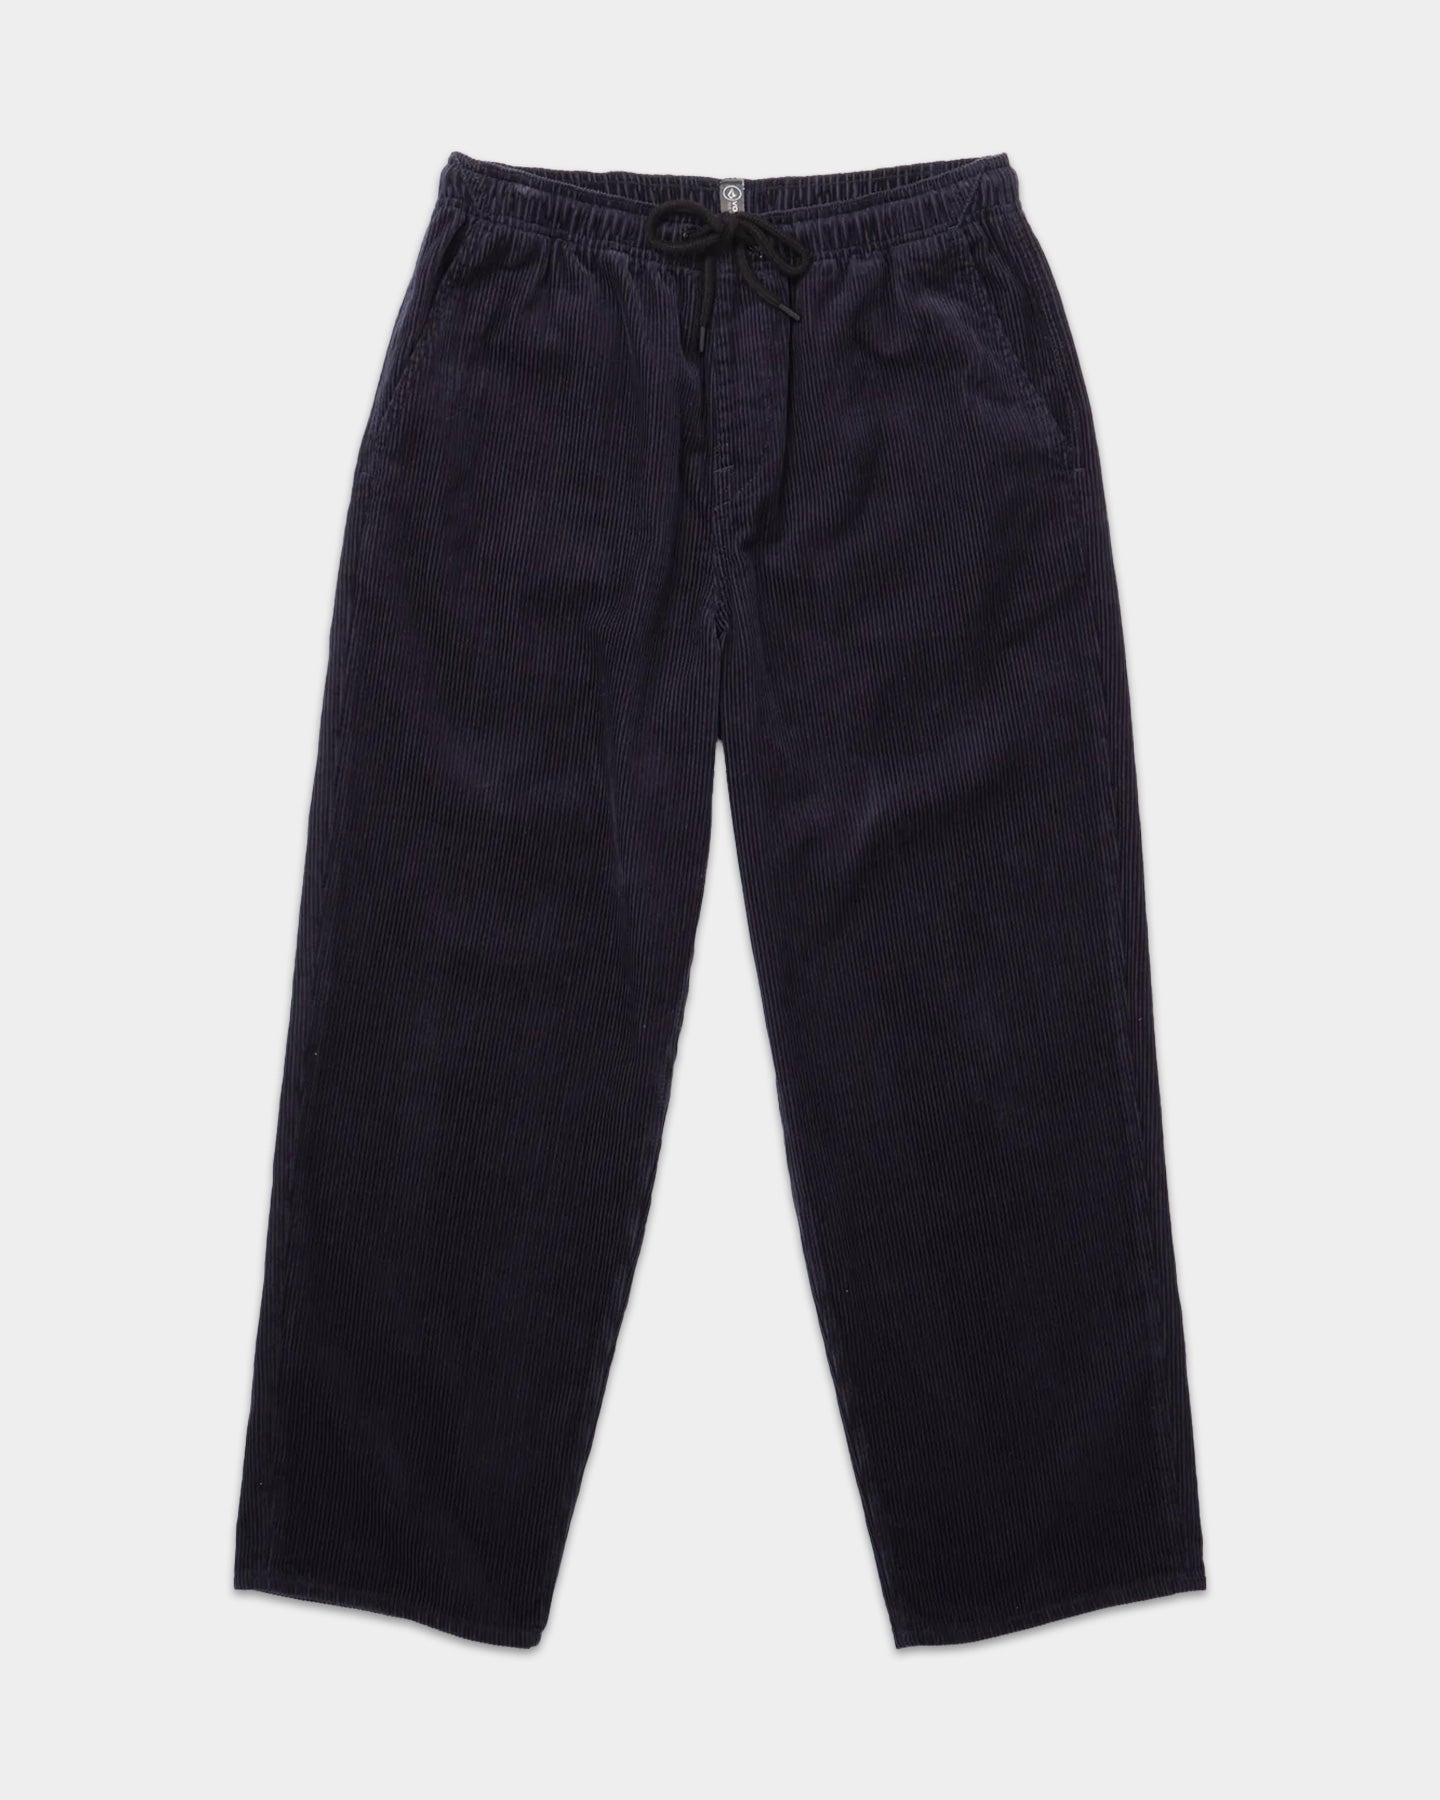 OUTER SPACED CASUAL PANT - dark navy